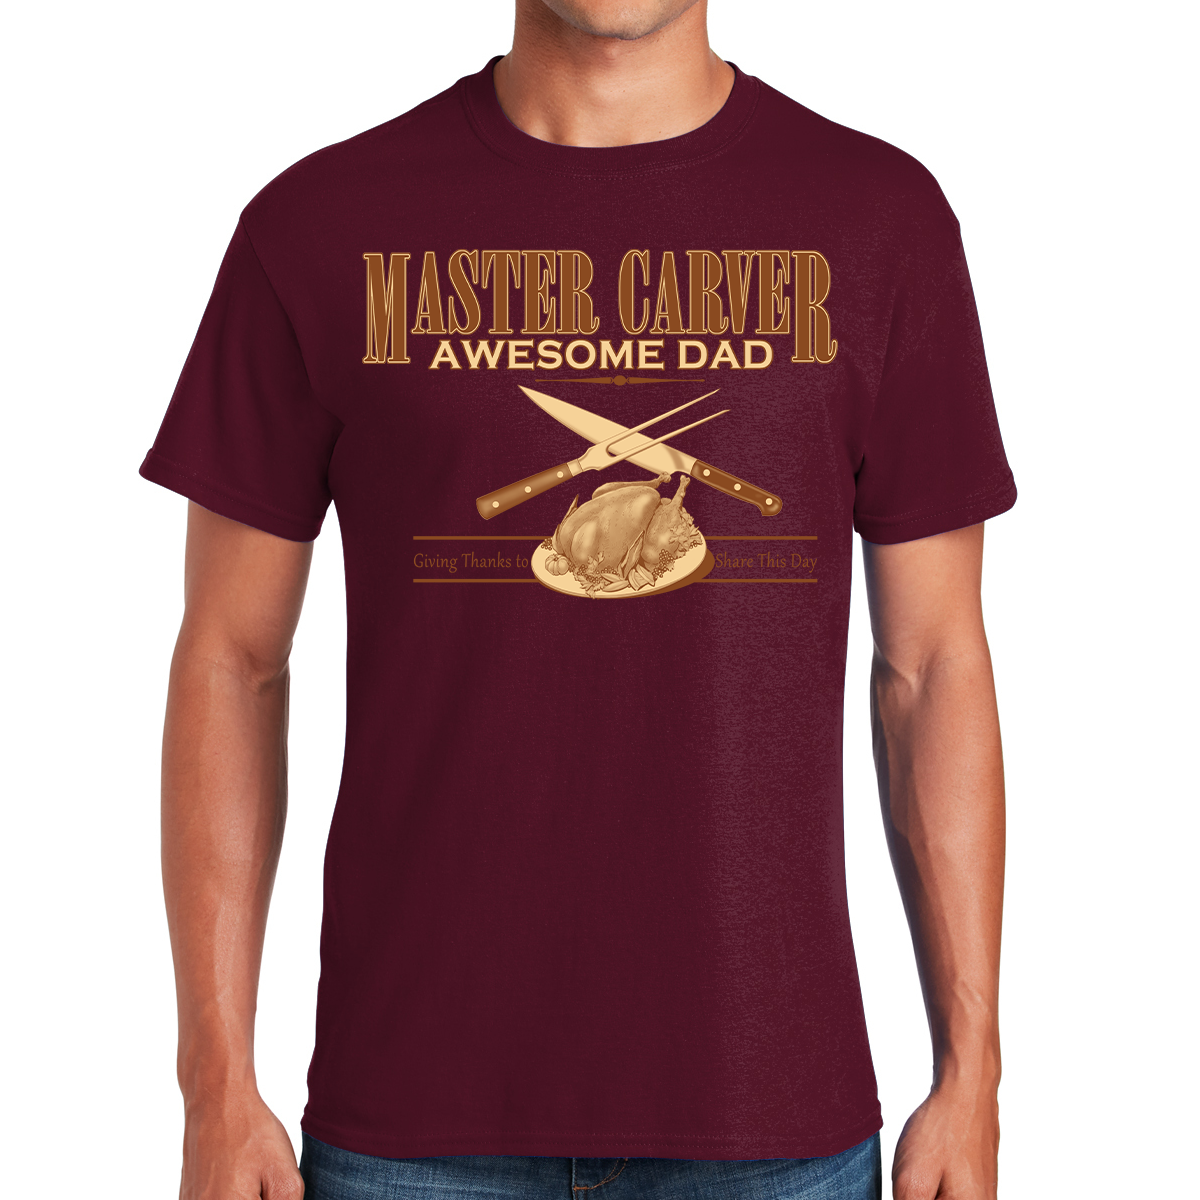 Awesome Dad Master Carver Giving Thanks To Share This Day Gift For Dads T-shirt